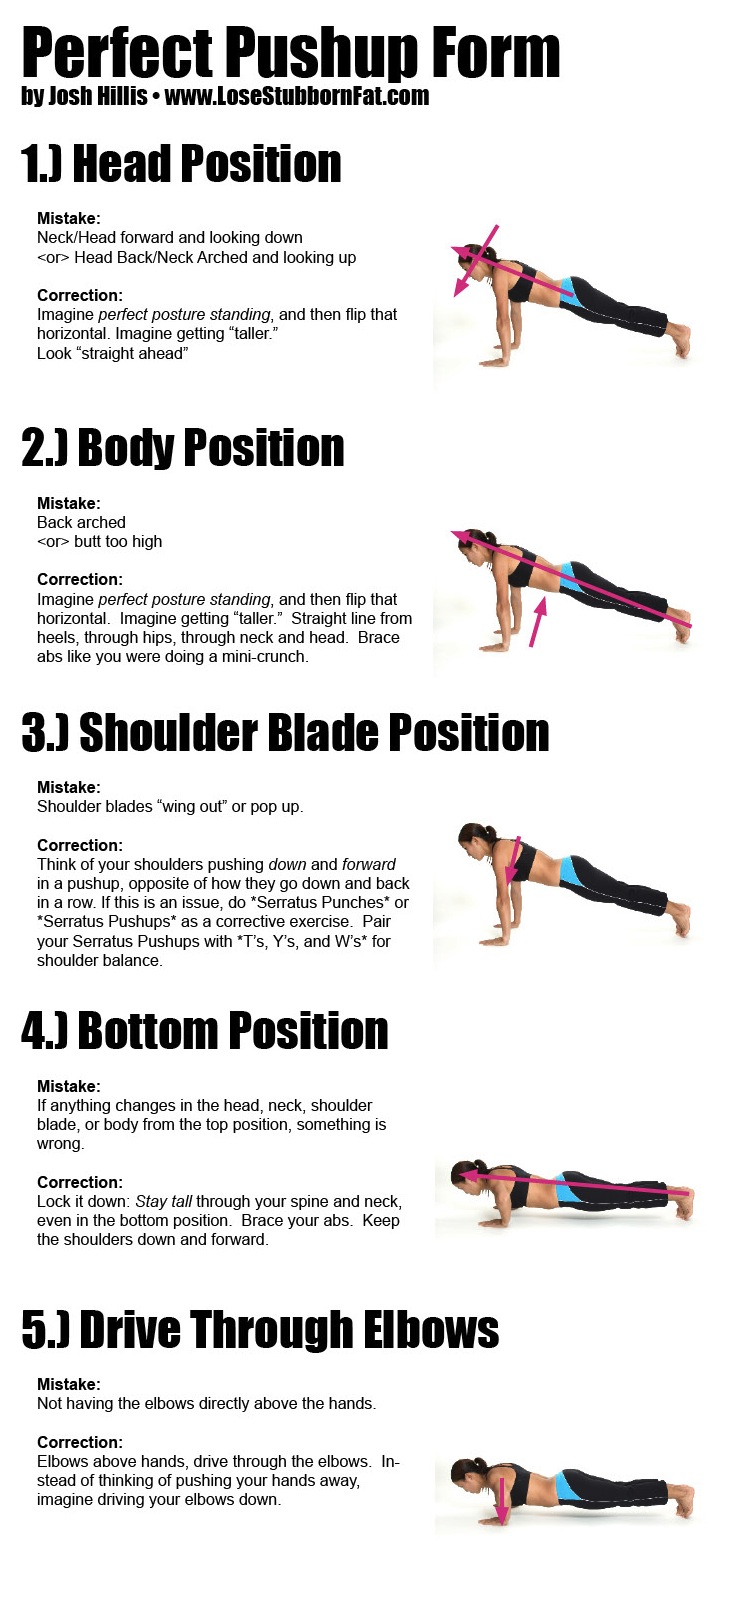 Perfecting the push-up